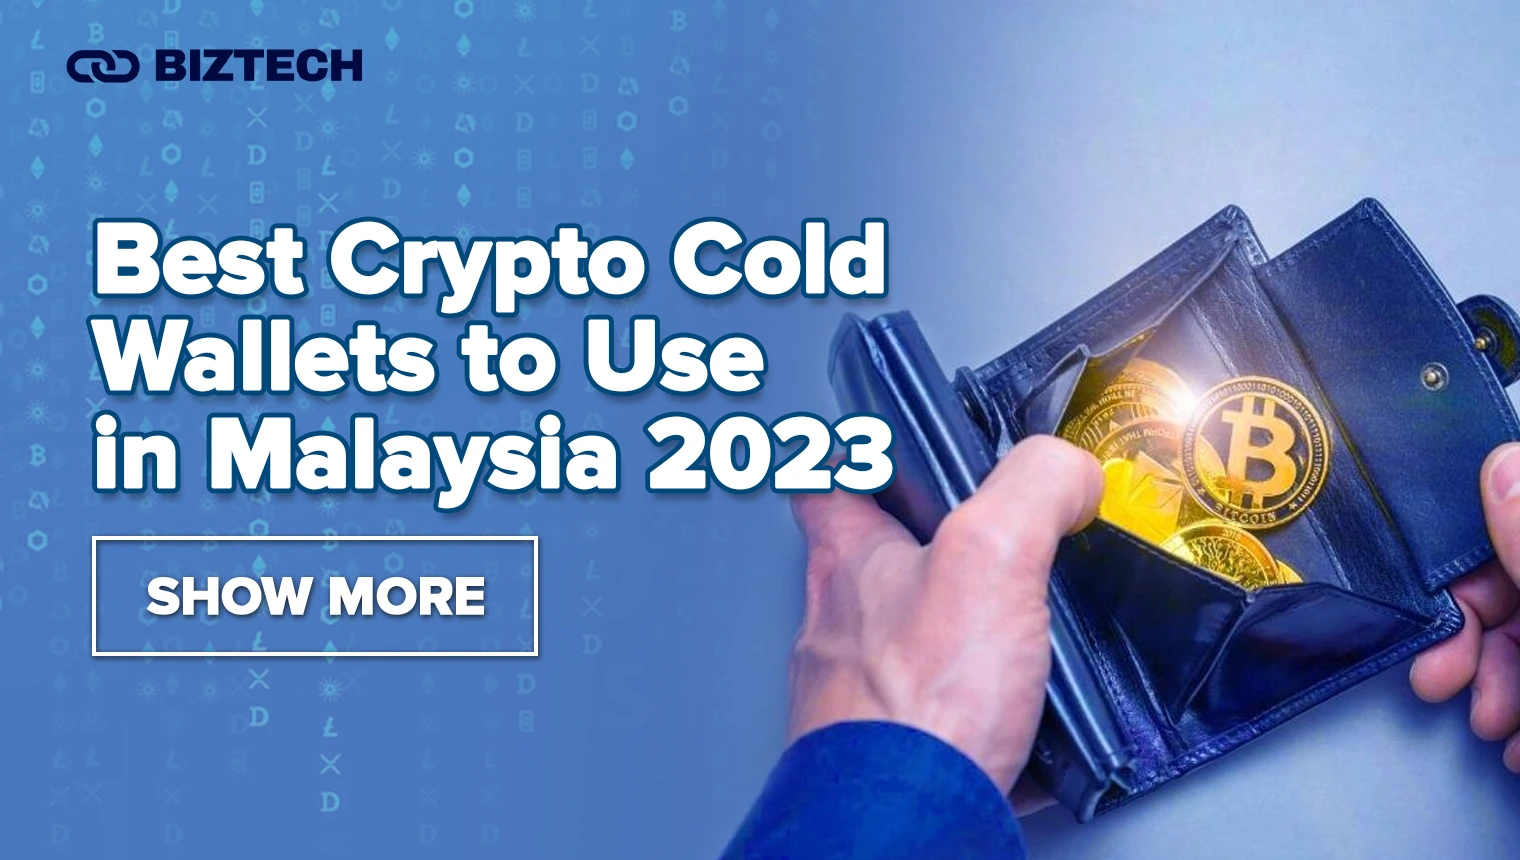 Best Crypto Cold Wallets to Use in Malaysia 2023